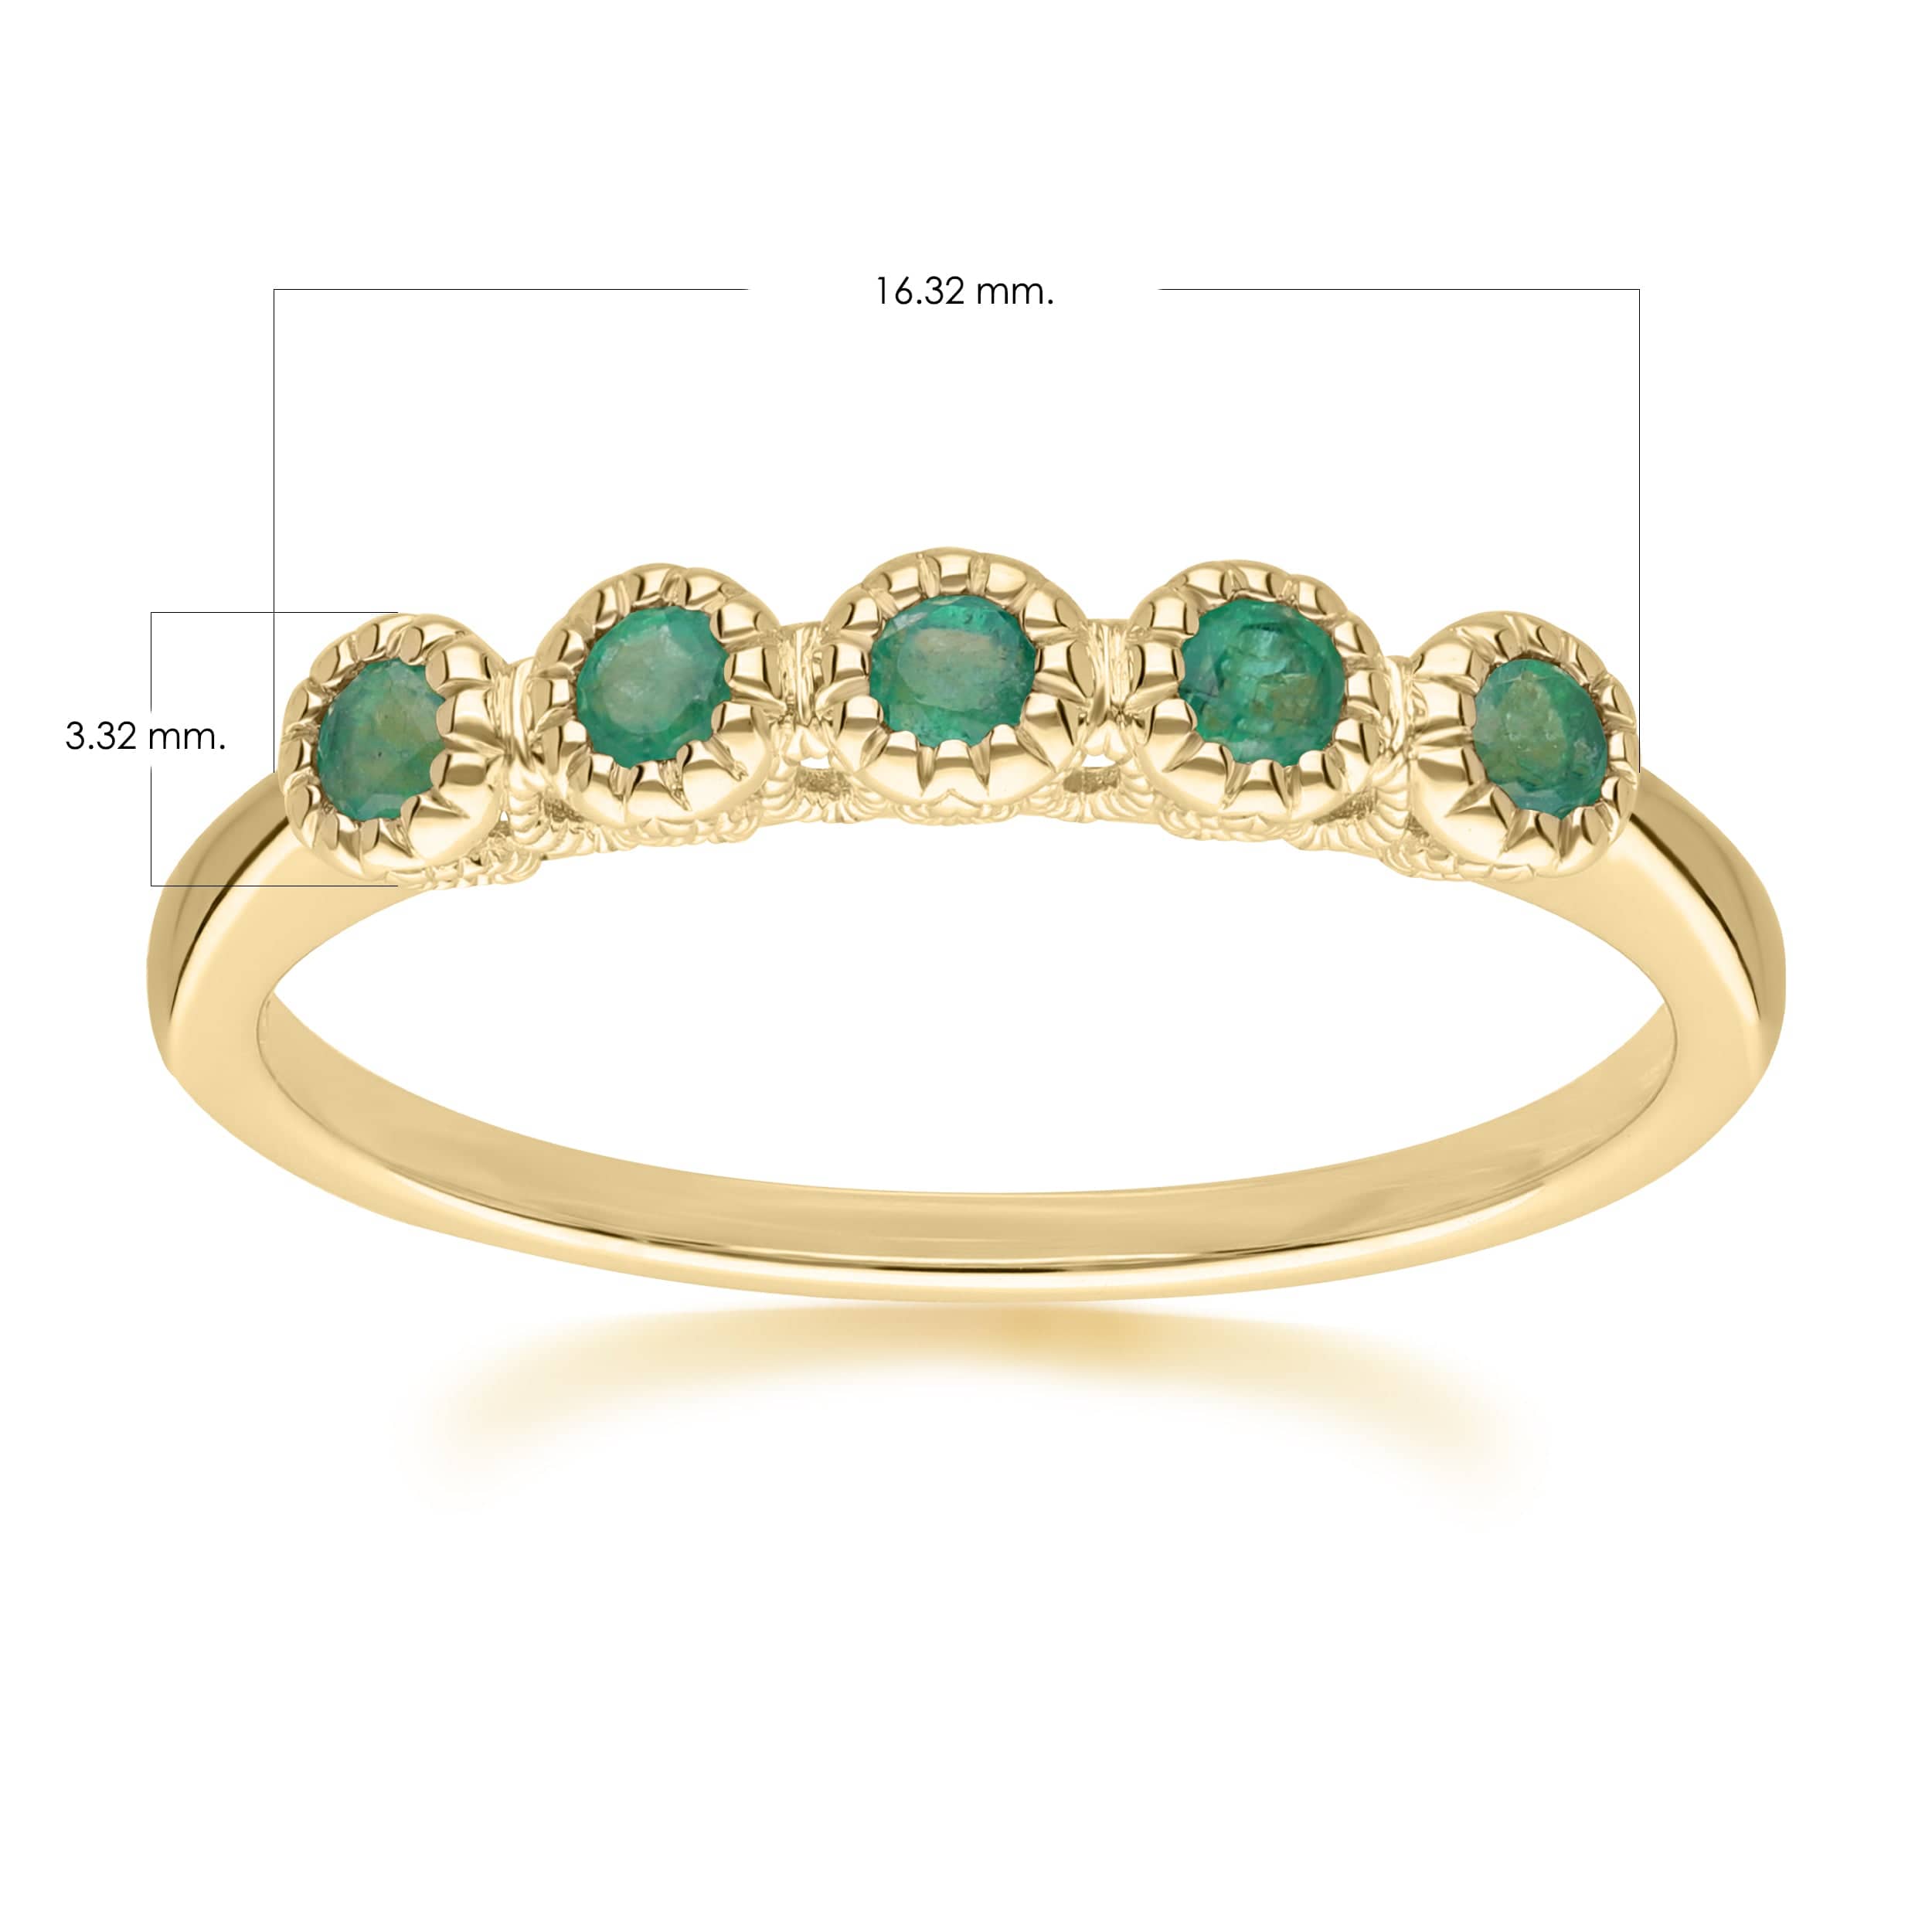 Classic Round Emerald Five Stone Eternity Ring in 9ct Yellow Gold